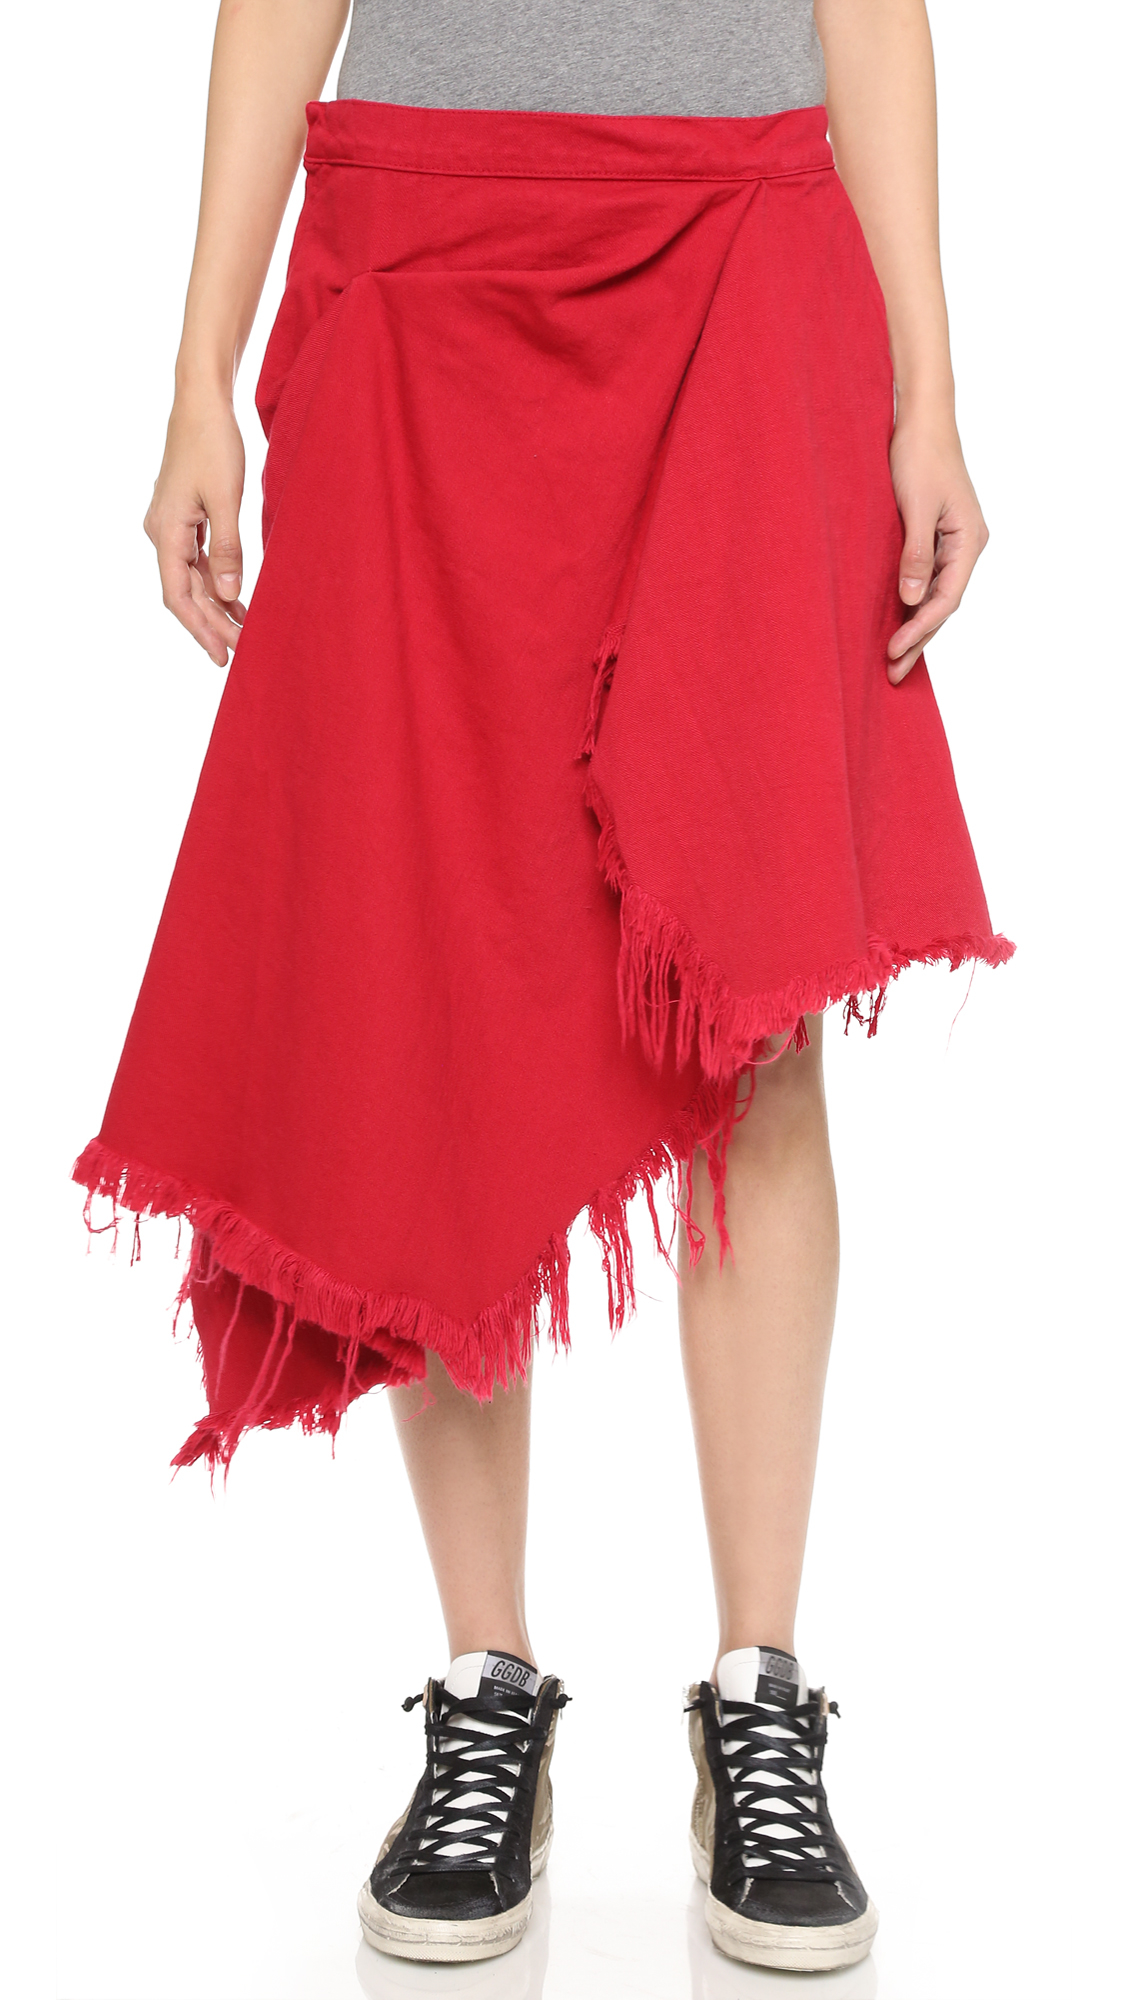 Lyst - Marques'Almeida Deconstructed Draped Skirt - Indigo in Red